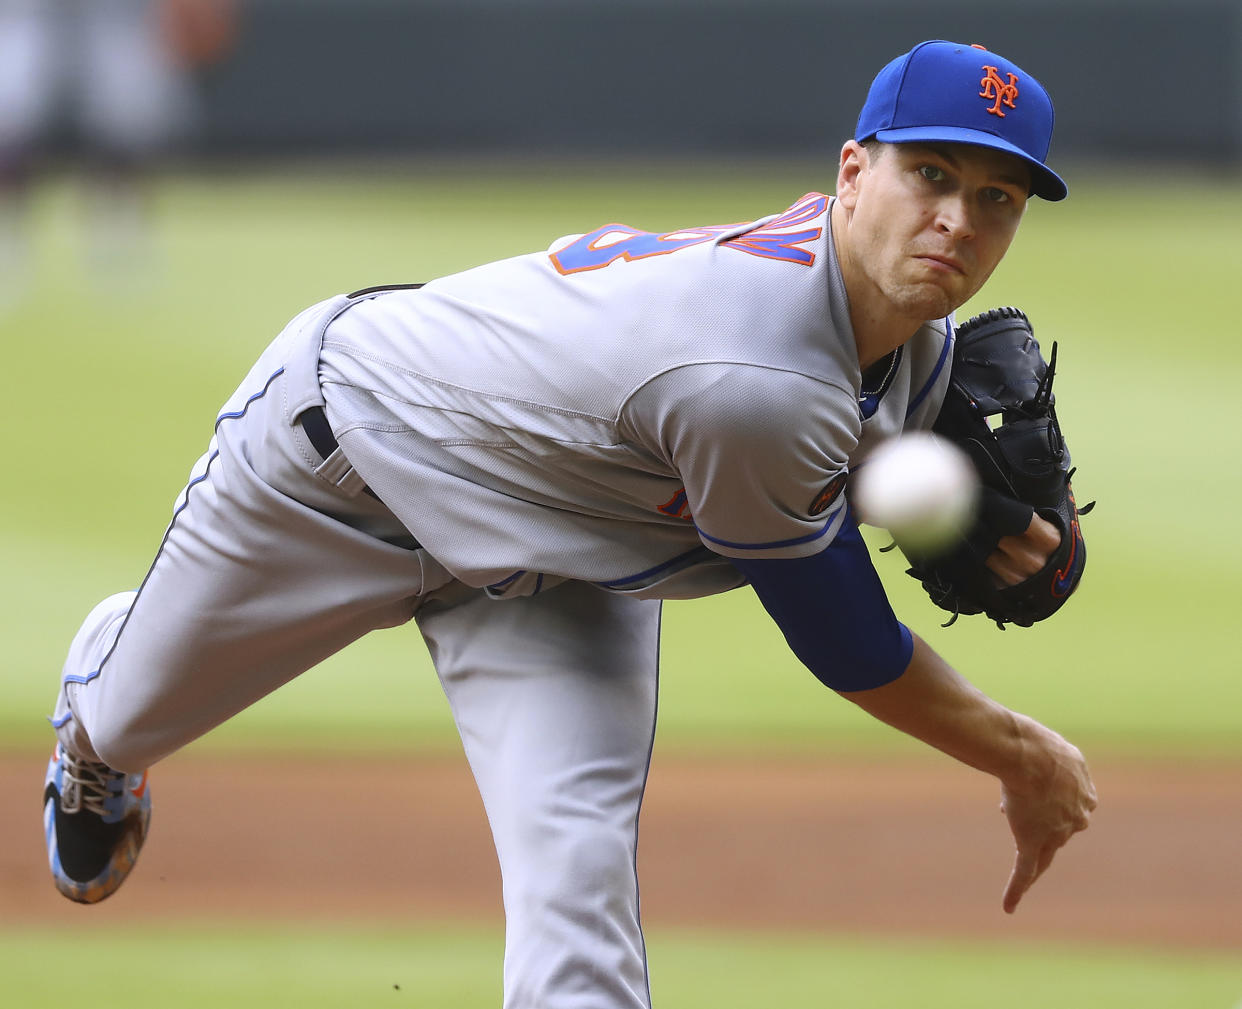 New York Mets pitcher Jacob deGrom’s quality stars have not led to many wins. (Curtis Compton/Atlanta Journal-Constitution via AP)